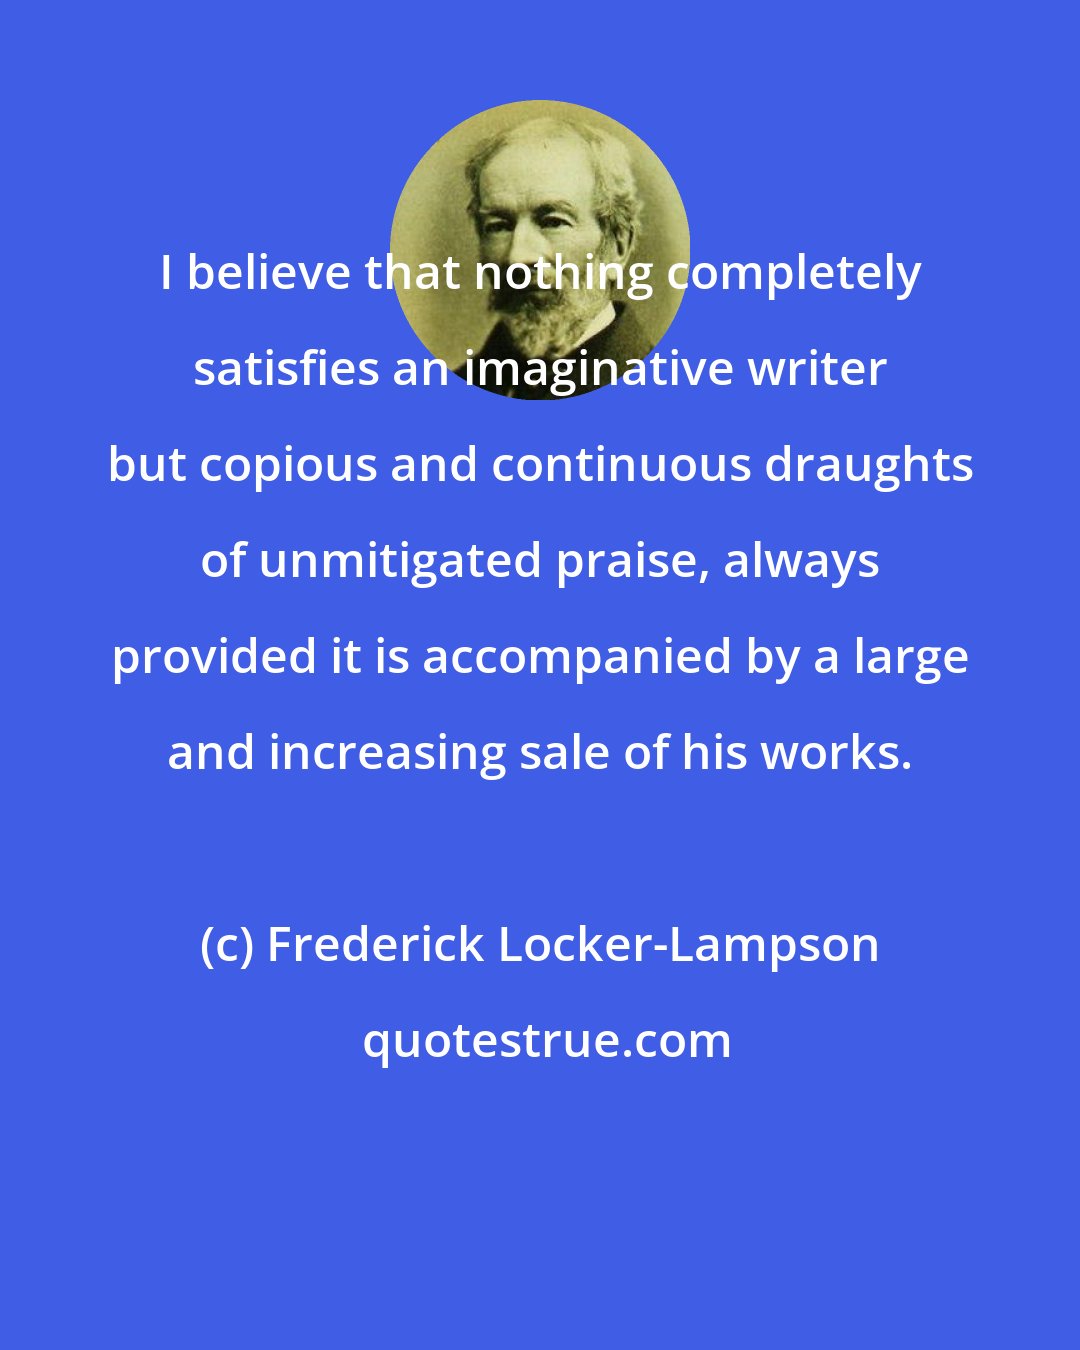 Frederick Locker-Lampson: I believe that nothing completely satisfies an imaginative writer but copious and continuous draughts of unmitigated praise, always provided it is accompanied by a large and increasing sale of his works.